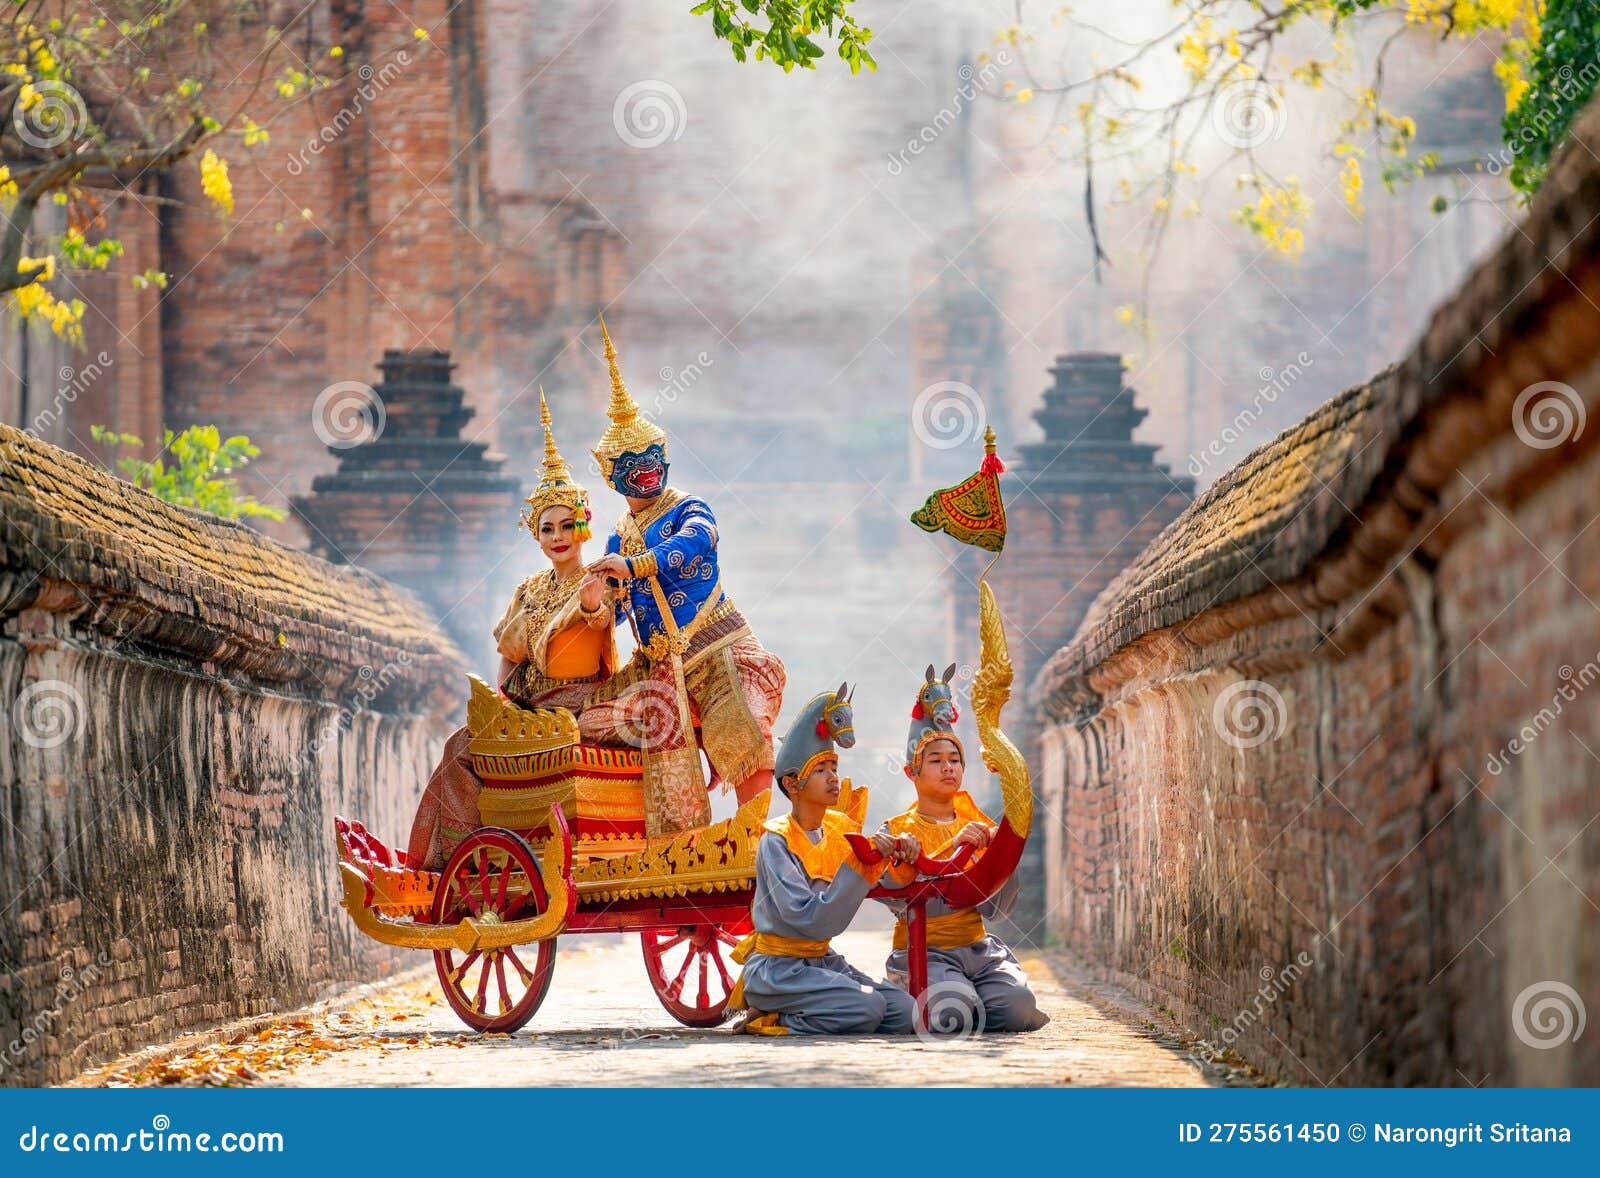 khon or traditional thai classic masked from the ramakien characters woman and blue monkey stay together on traditional chariot in